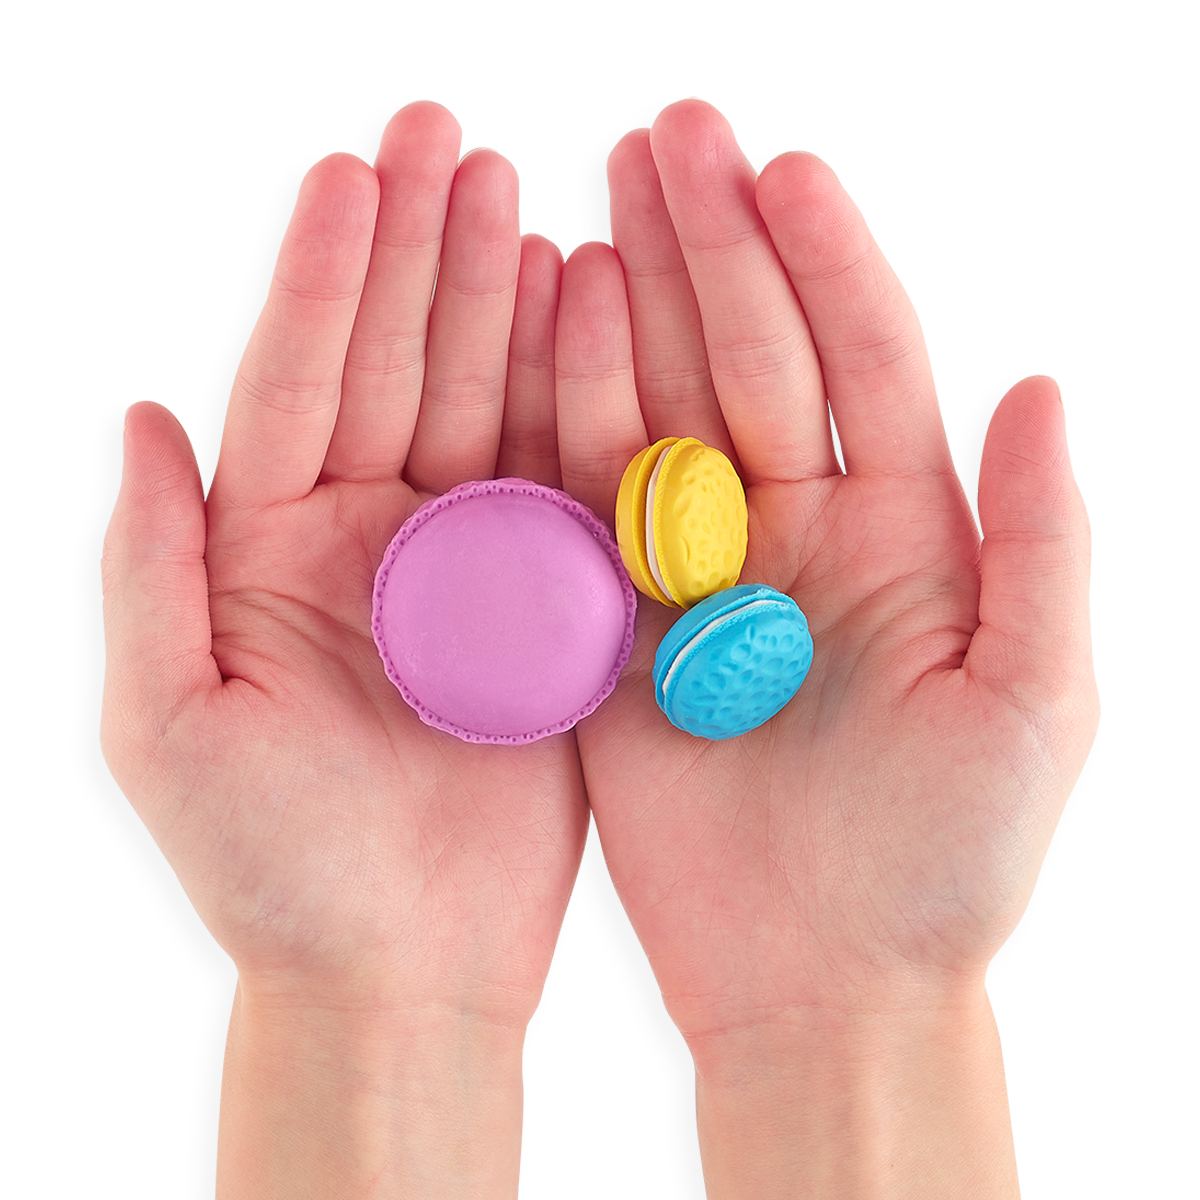 Three Le Macaron Patisserie Scented Erasers in persons hands